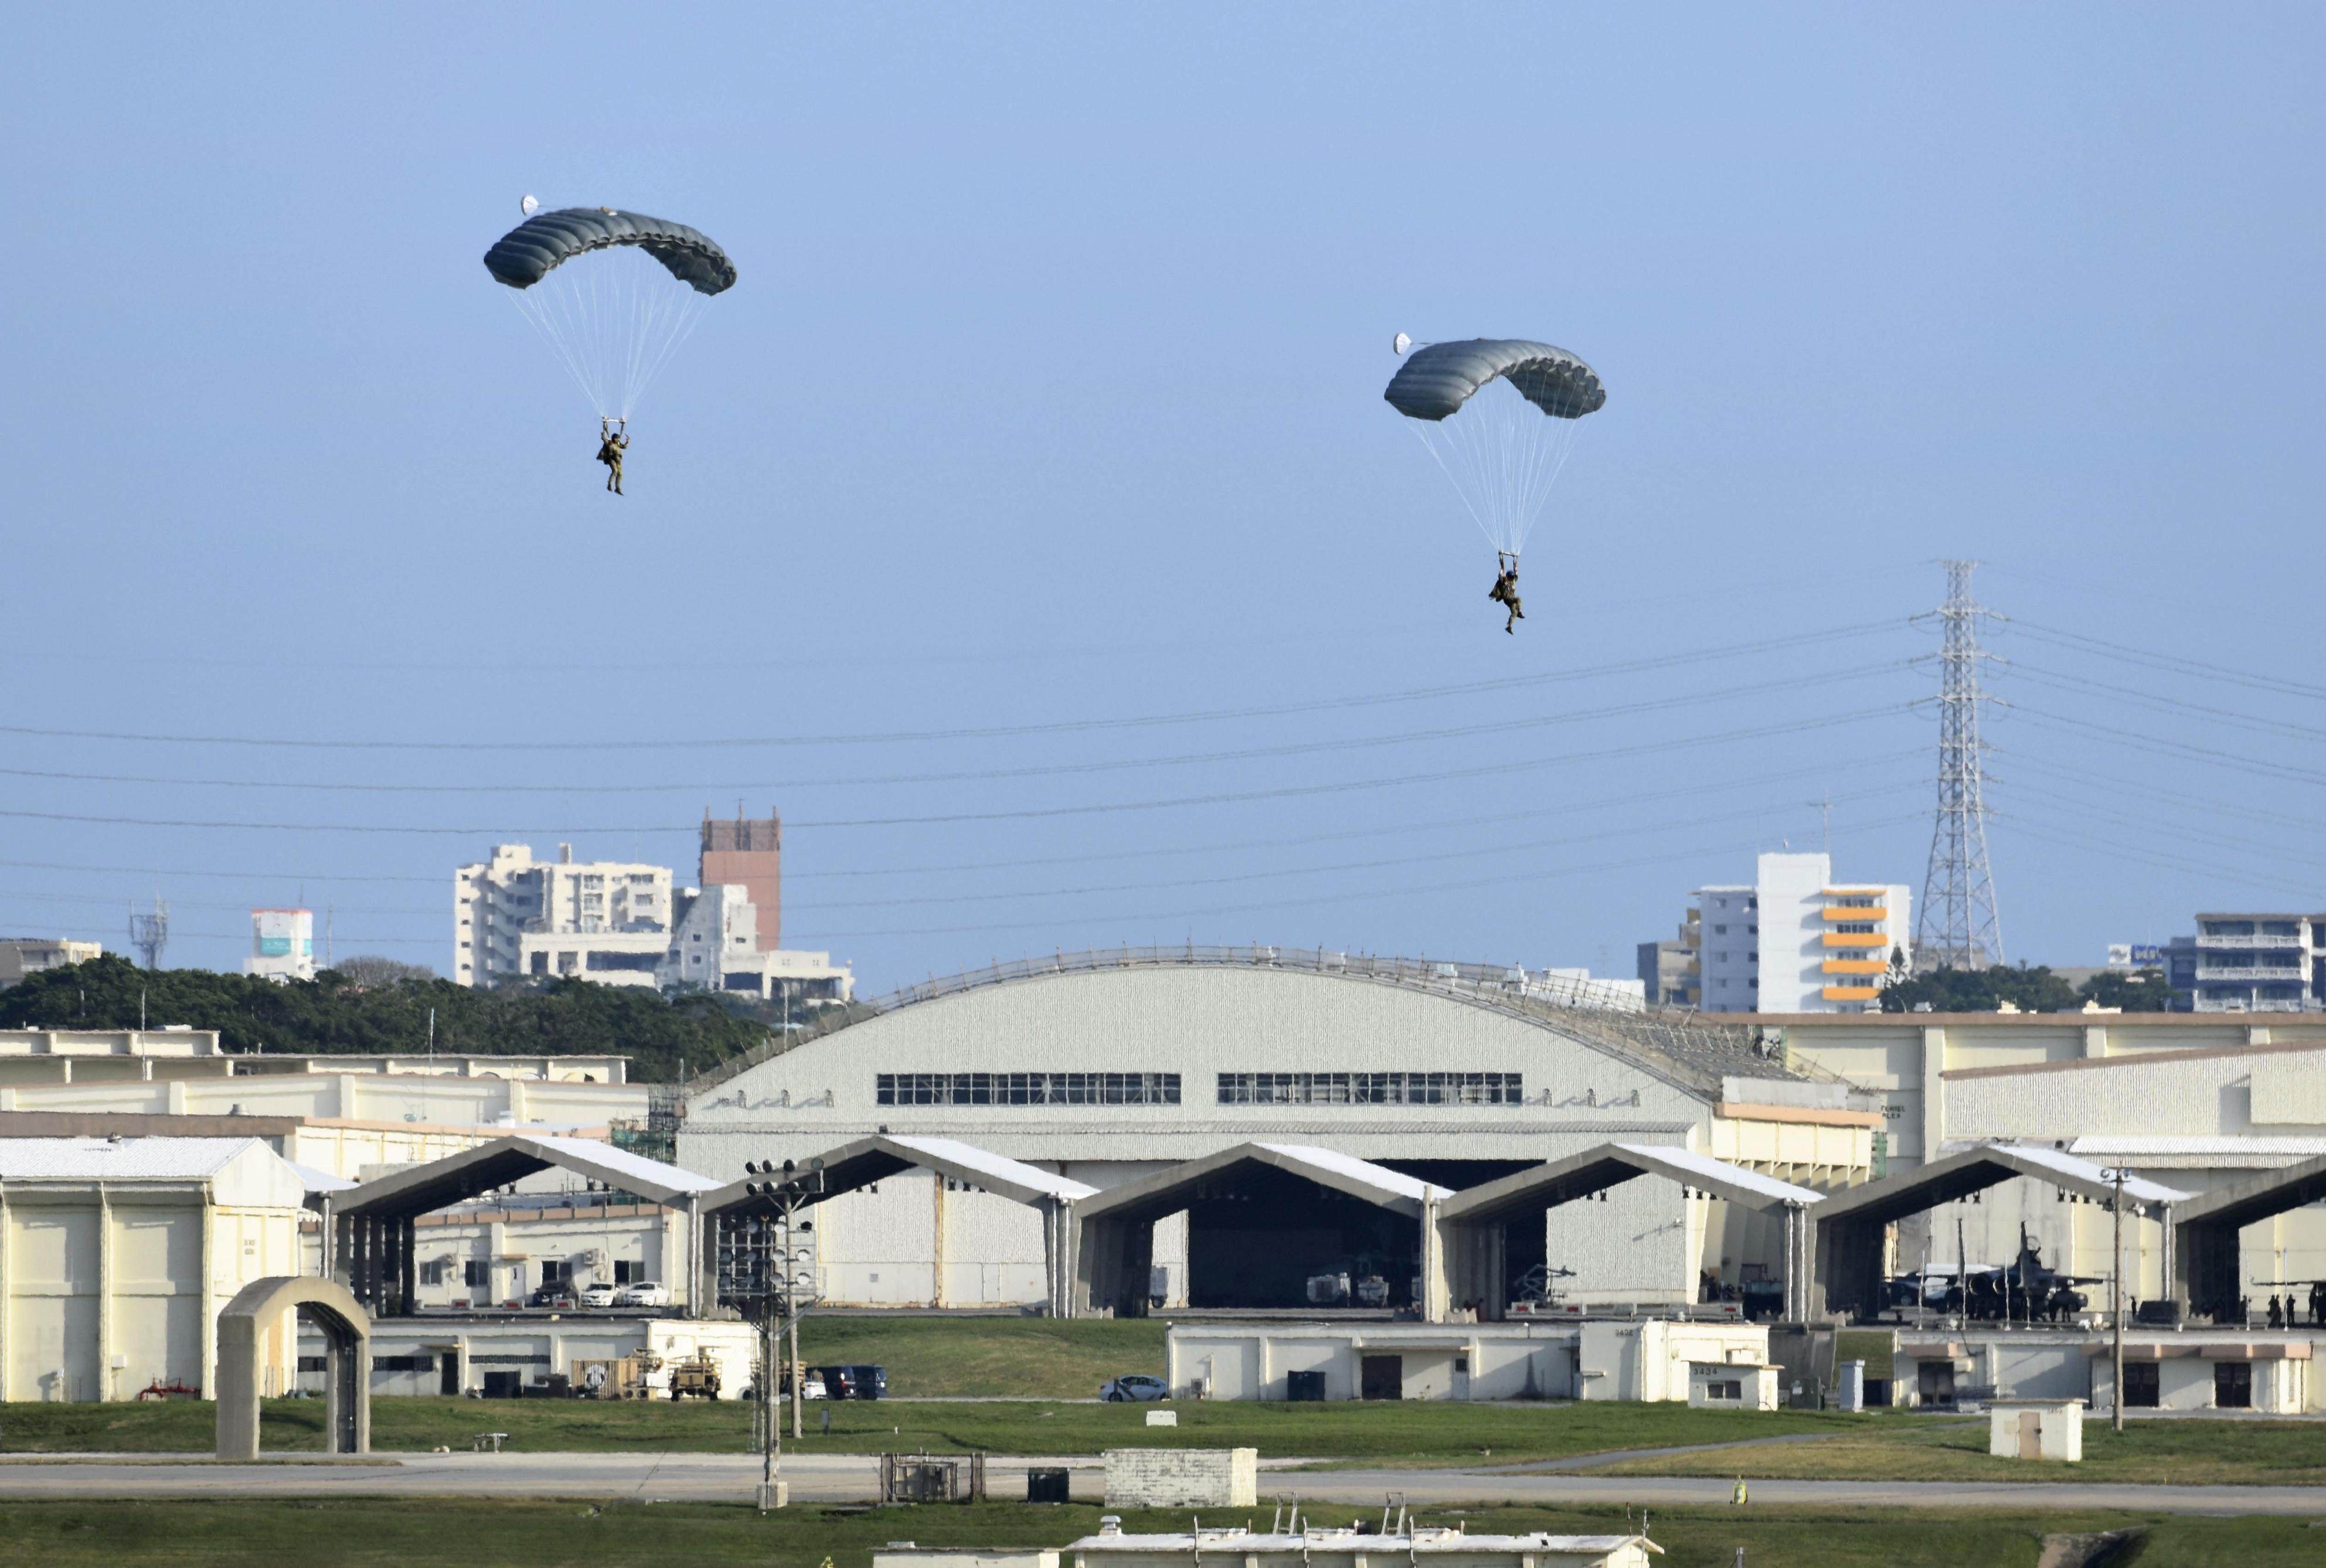 US Air Force personnel conduct a parachute drill at an airbase in Kadena, Okinawa. Photo: Kyodo